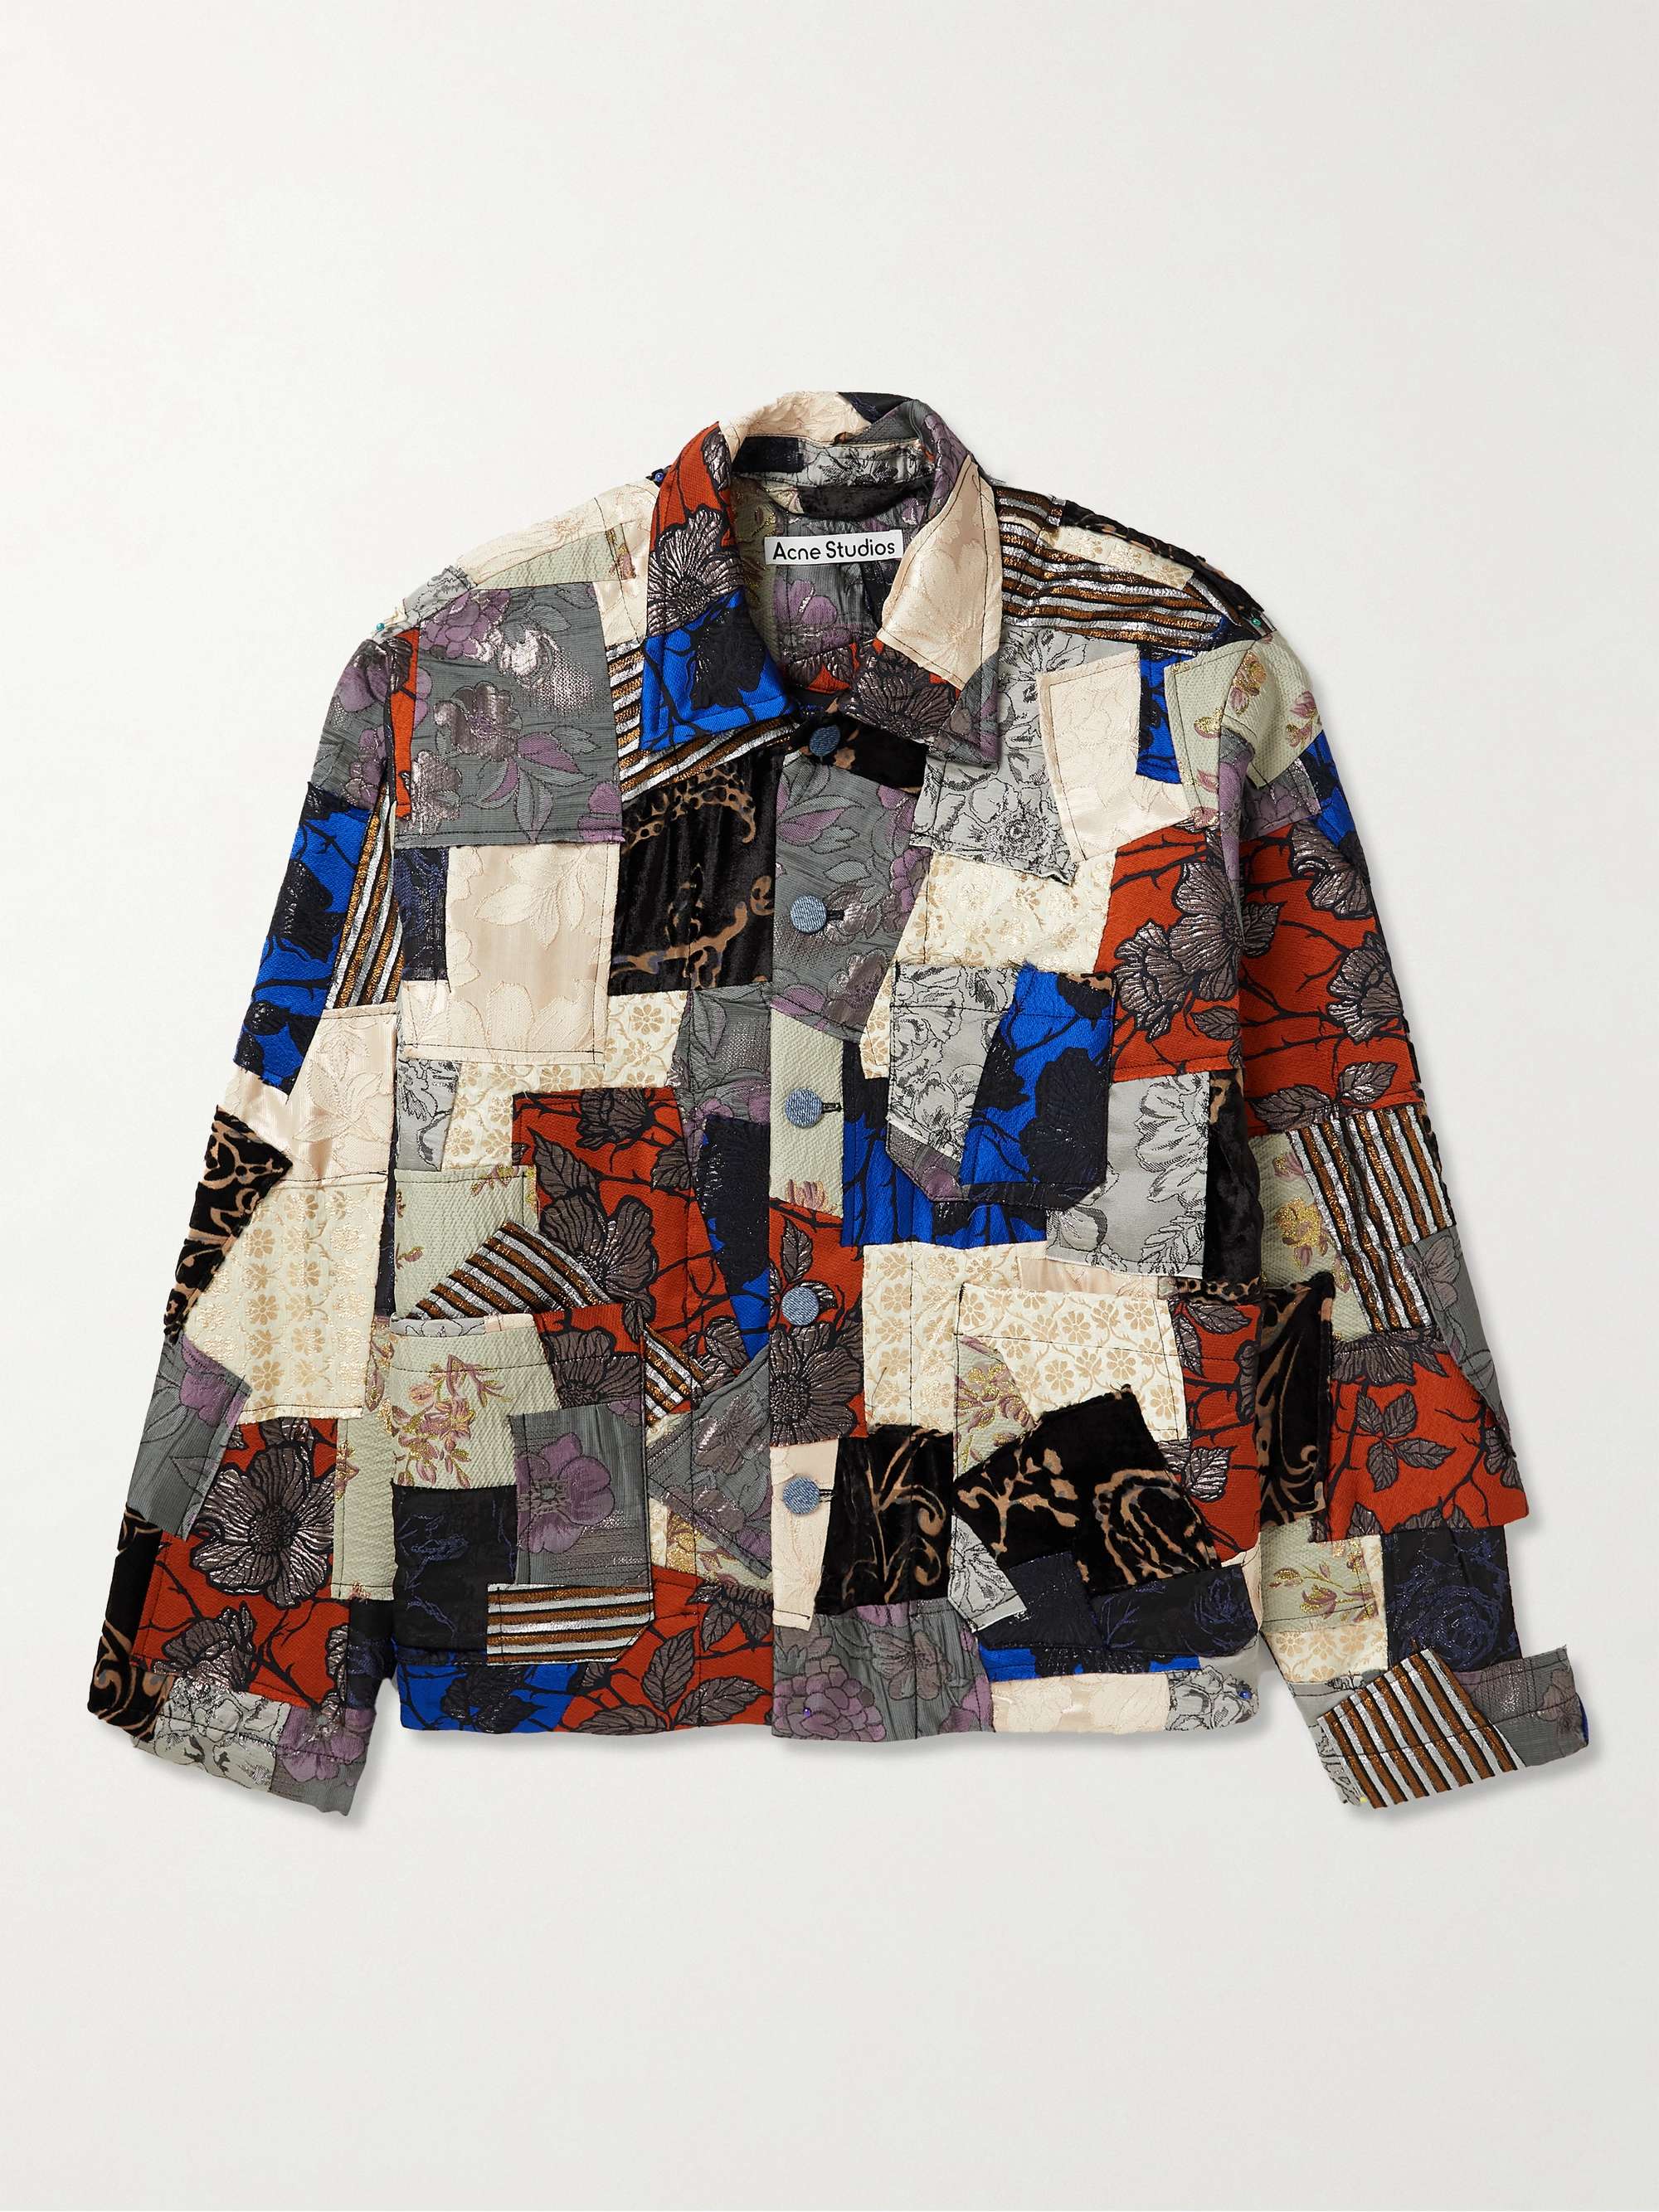 ACNE STUDIOS Patchwork Embroidered Metallic Jacquard Jacket for